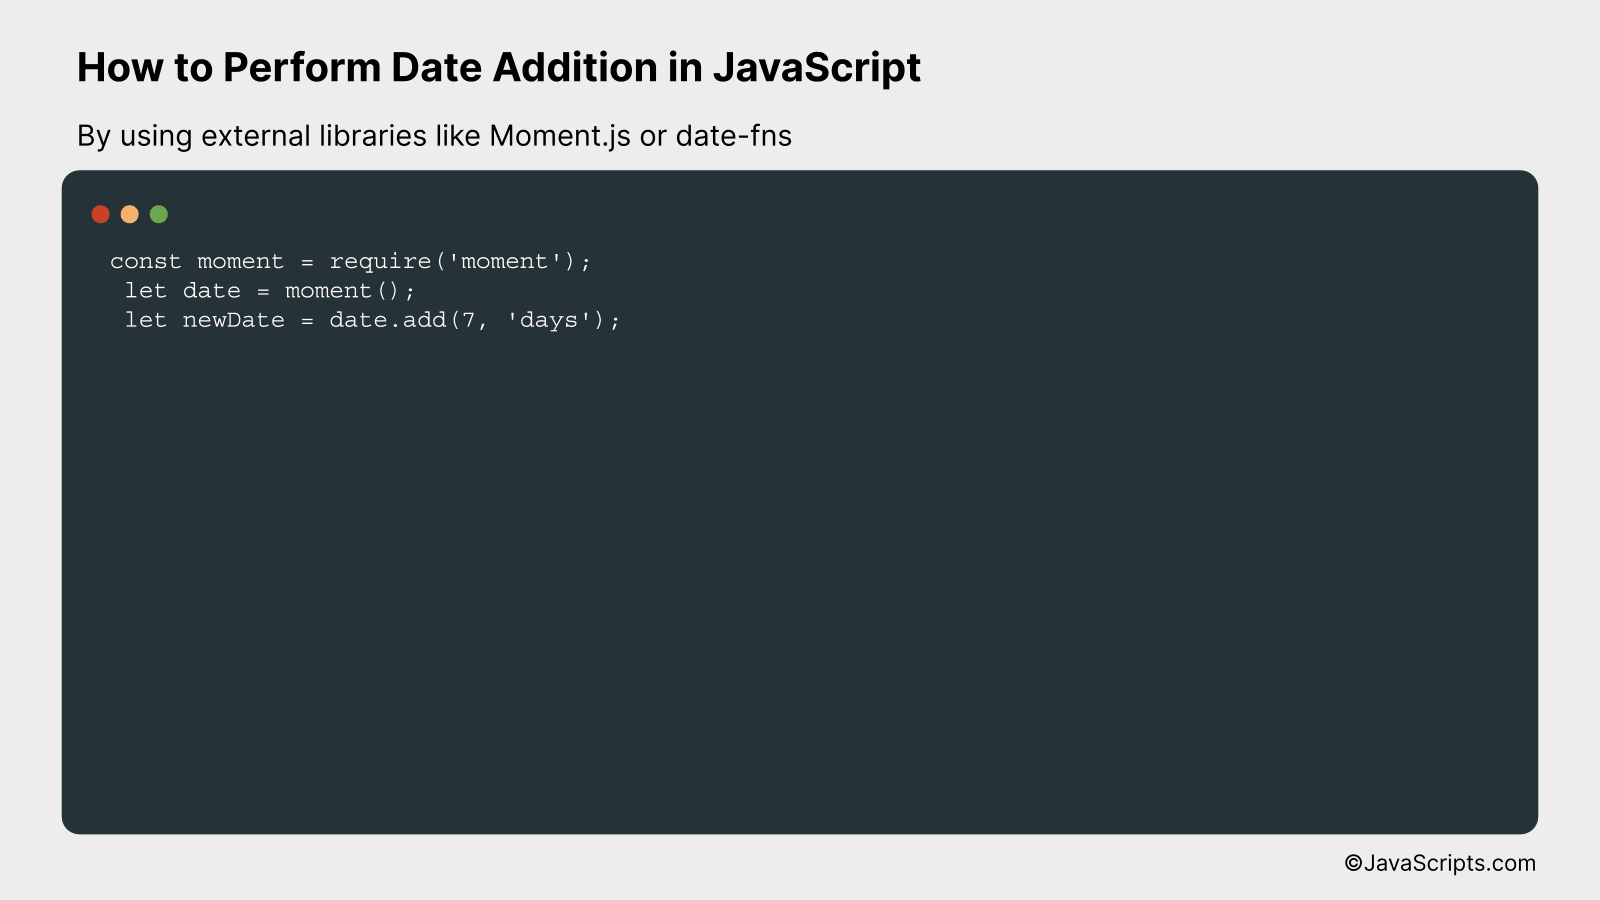 By using external libraries like Moment.js or date-fns